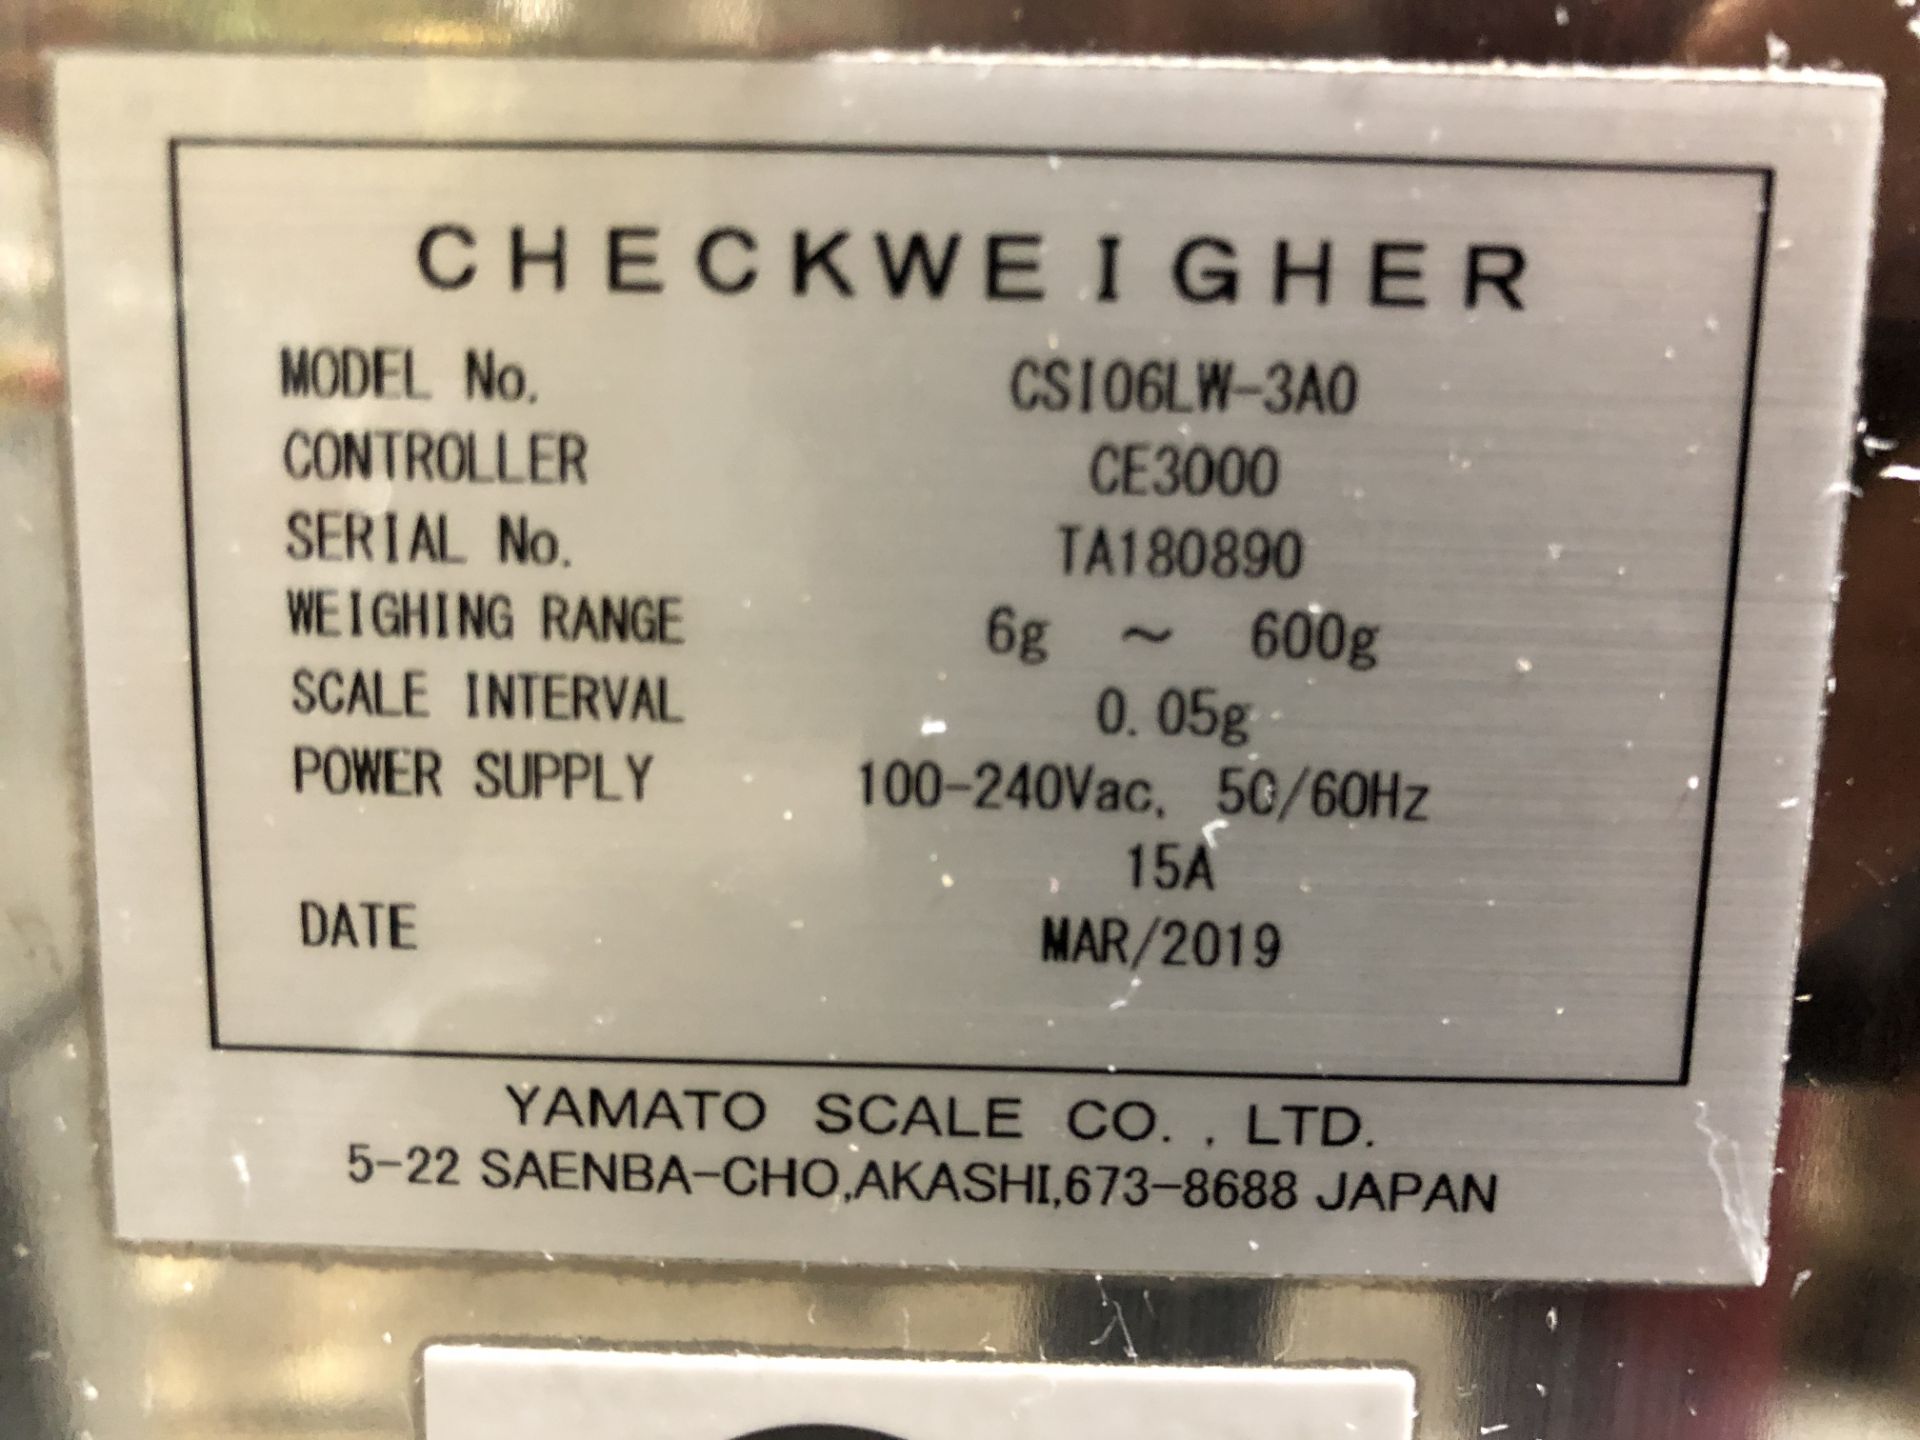 2019 Yamato S/S Checkweighers, Model: CE3000, Weighing Range 6g – 600g, S/N: TA180890 Rigging - Image 2 of 3